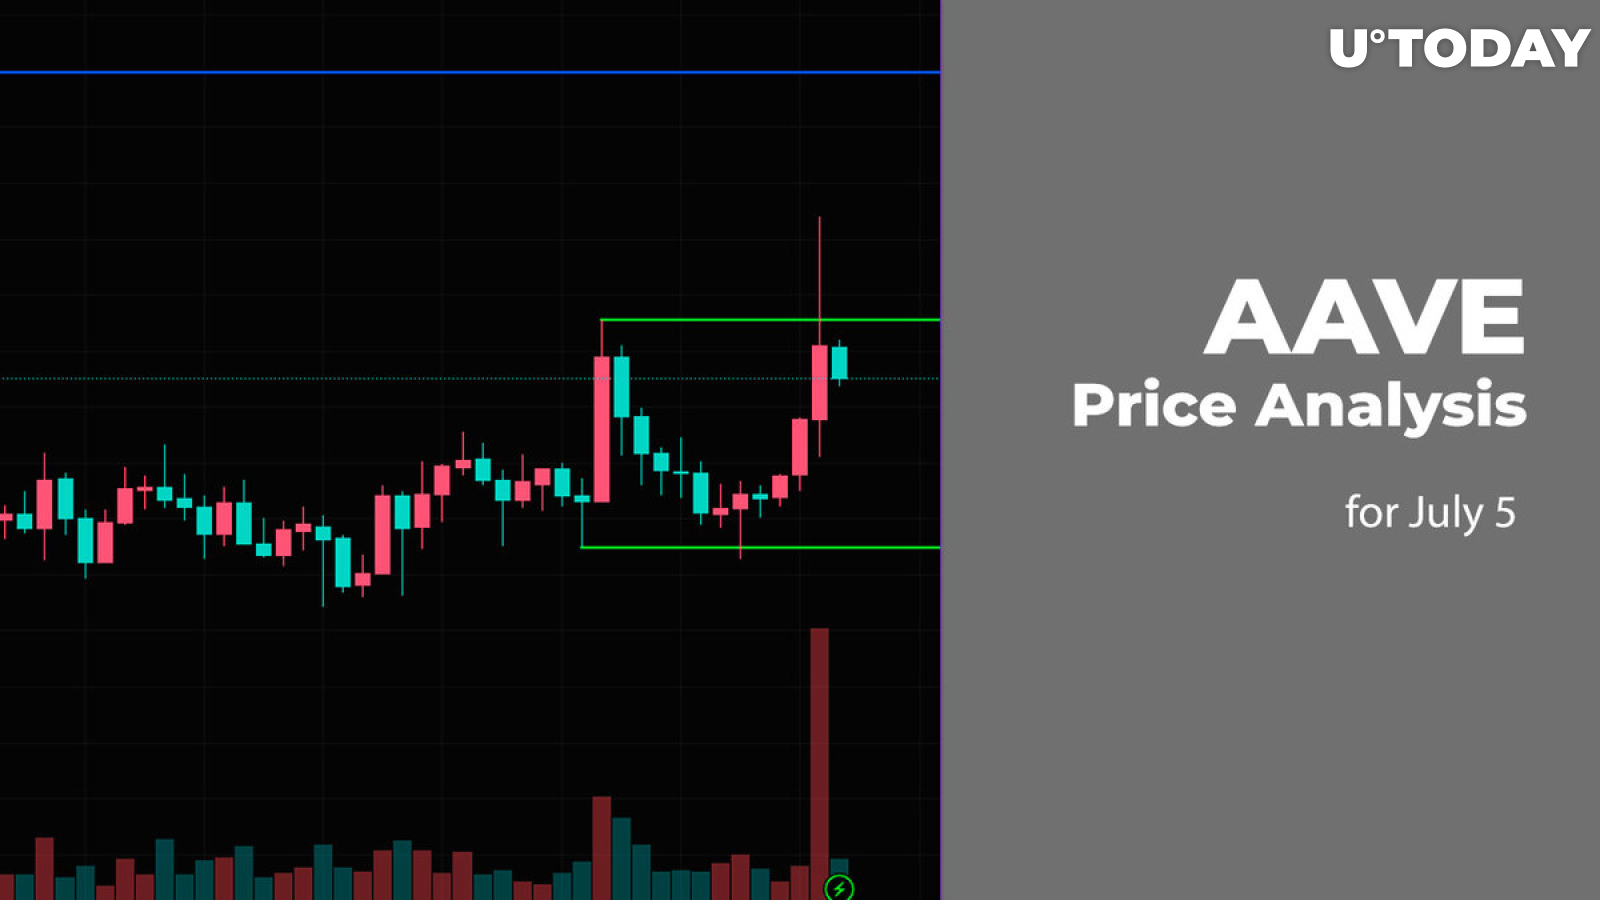 AAVE Price Analysis for July 5